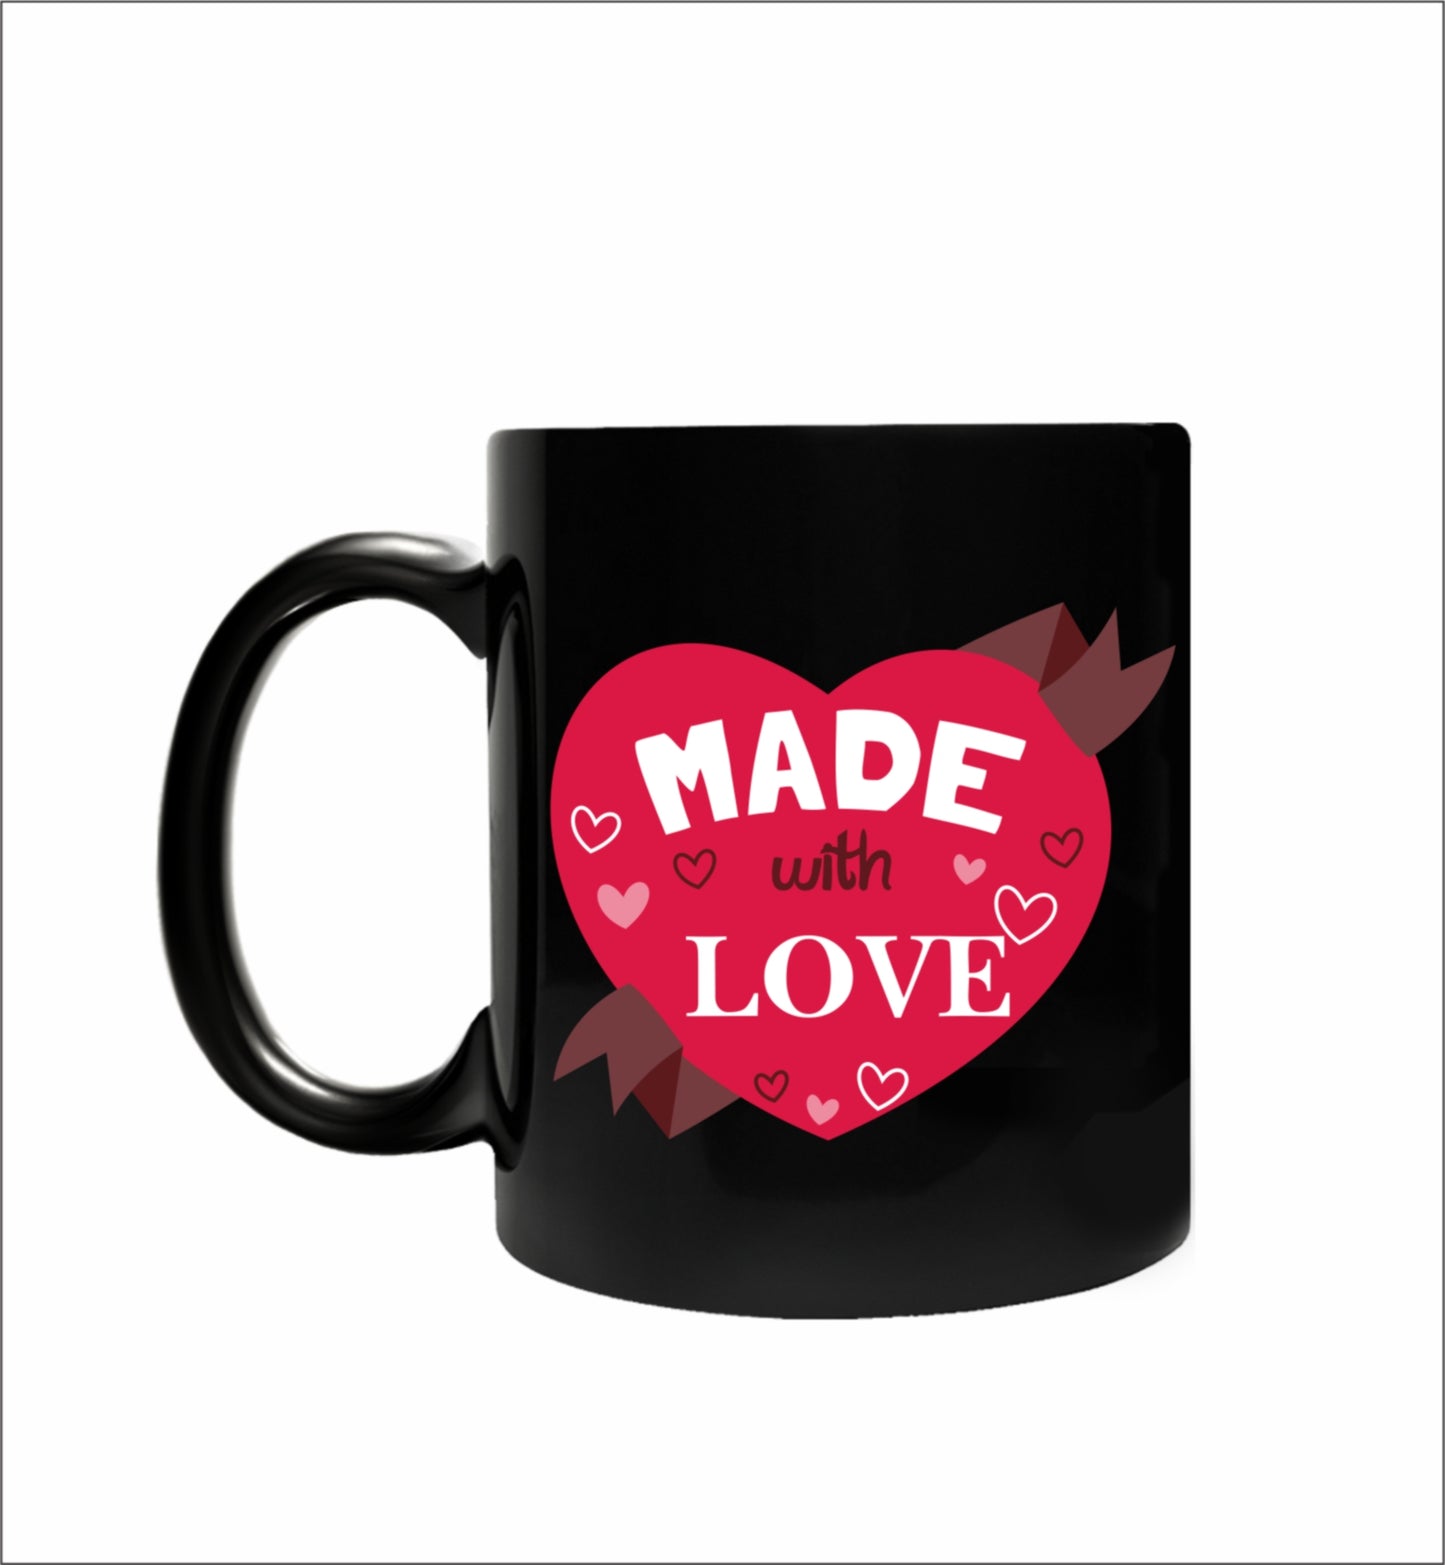 Made With Love Valentine's Day Coffee Mug for your loved ones